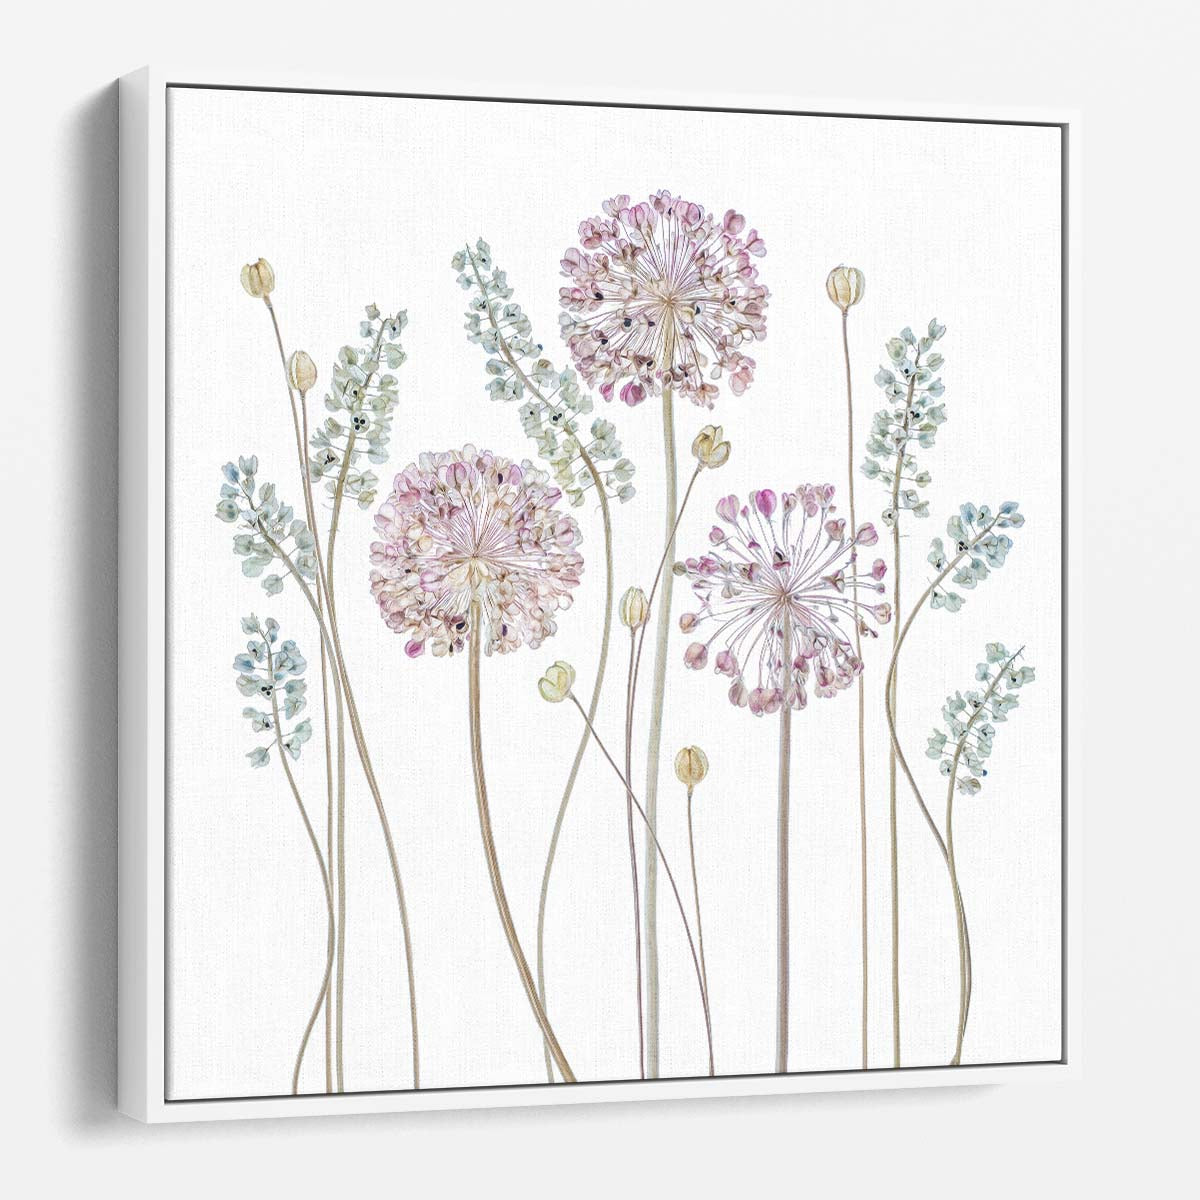 Allium & Muscari Floral Photography Wall Art by Luxuriance Designs. Made in USA.